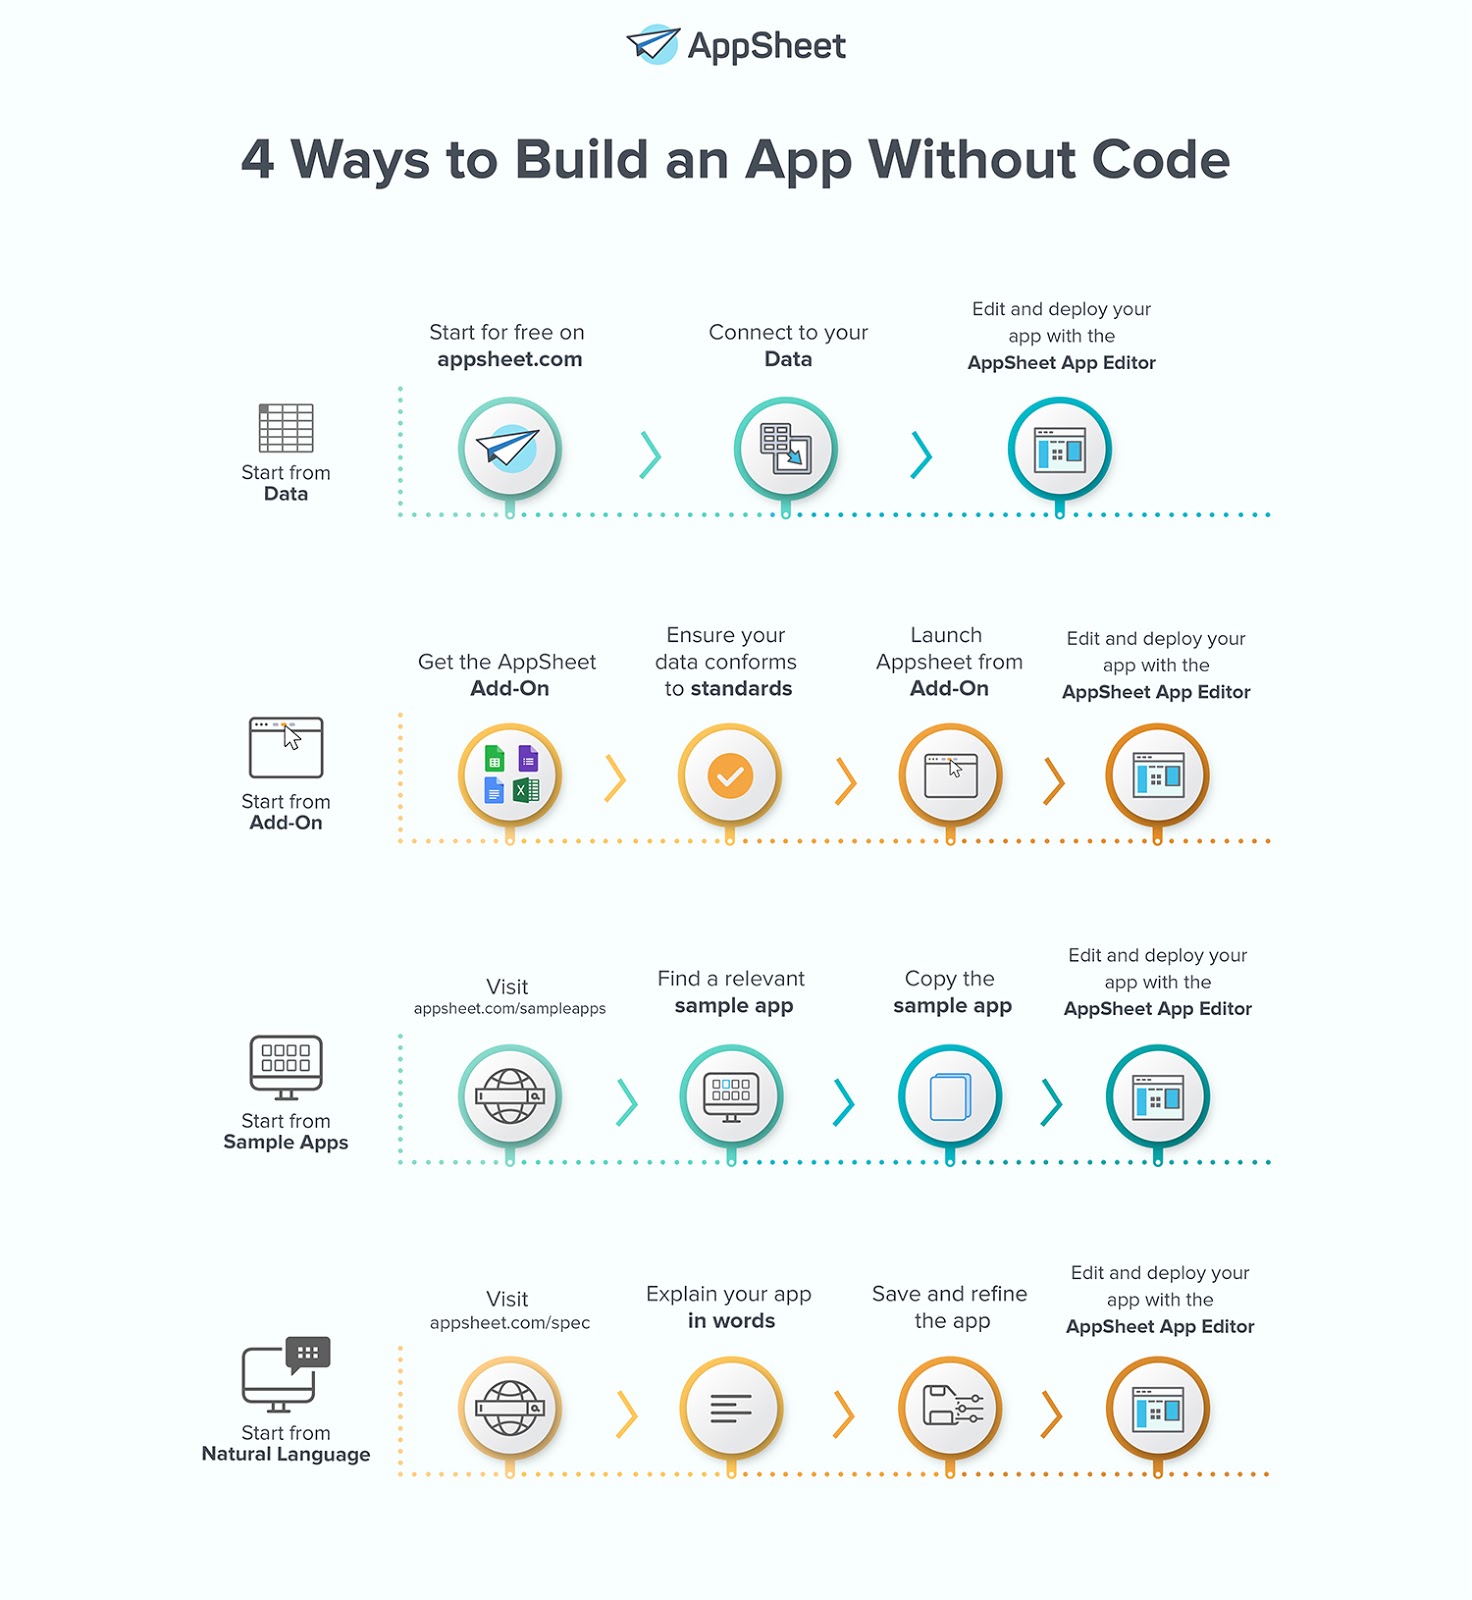 4 Ways to Build an App Without Code from AppSheet